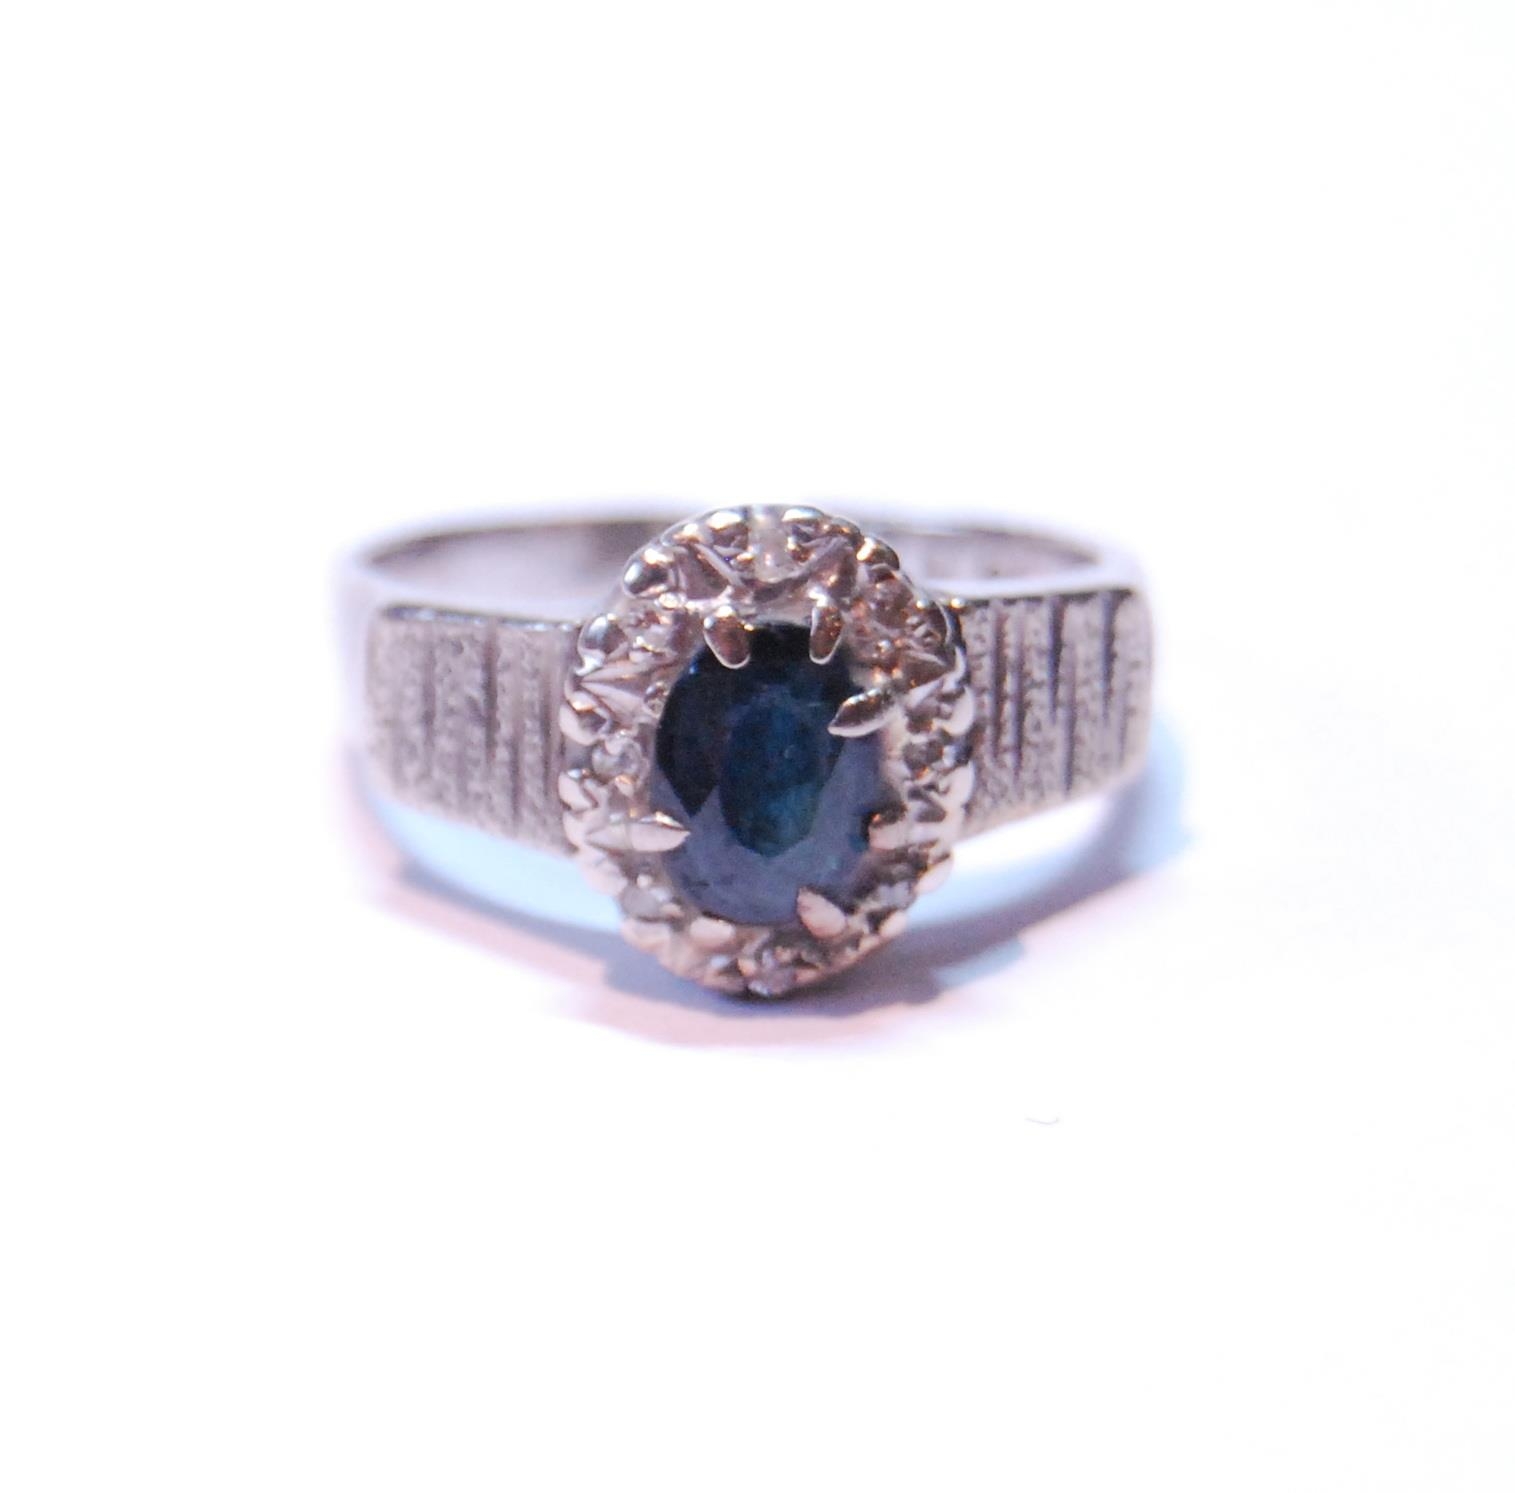 Diamond and sapphire oval cluster ring with eight-cut brilliants, in 18ct white gold, 1973, size